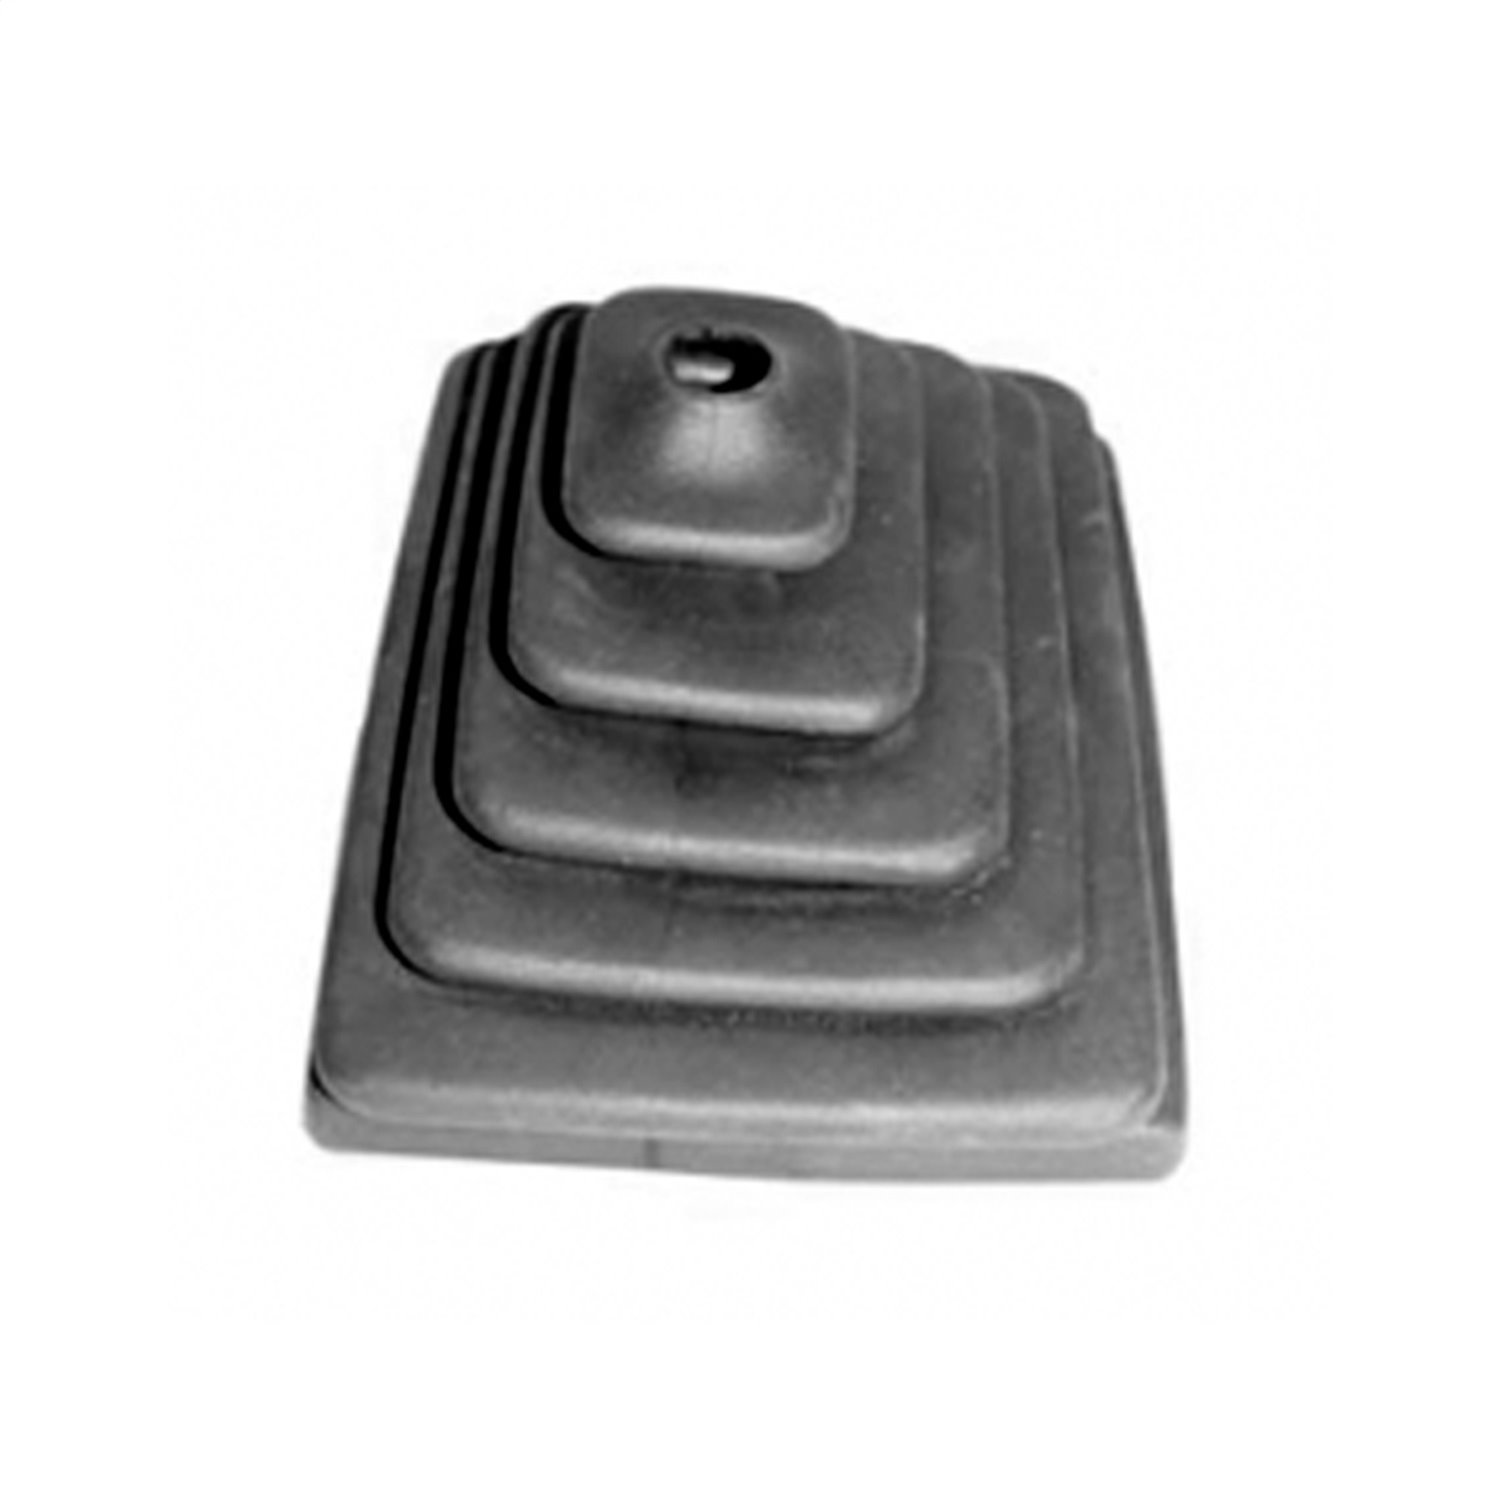 Replacement shifter boot from Omix-ADA 84-88 Jeep Cherokee XJ with a 5-speed manual transmission.